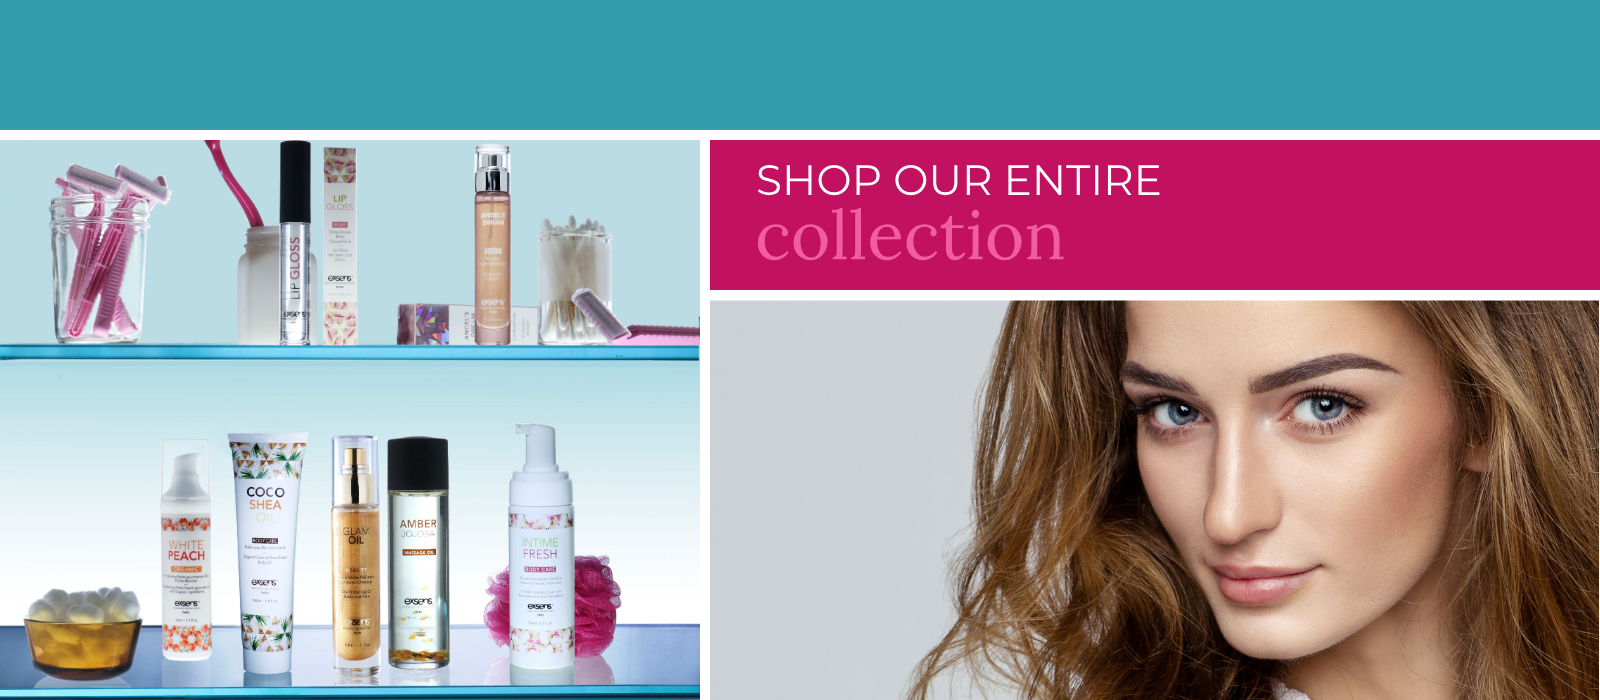 Shop EXSENS Vegan Paraben Free Body Care and Sexual Wellness Products